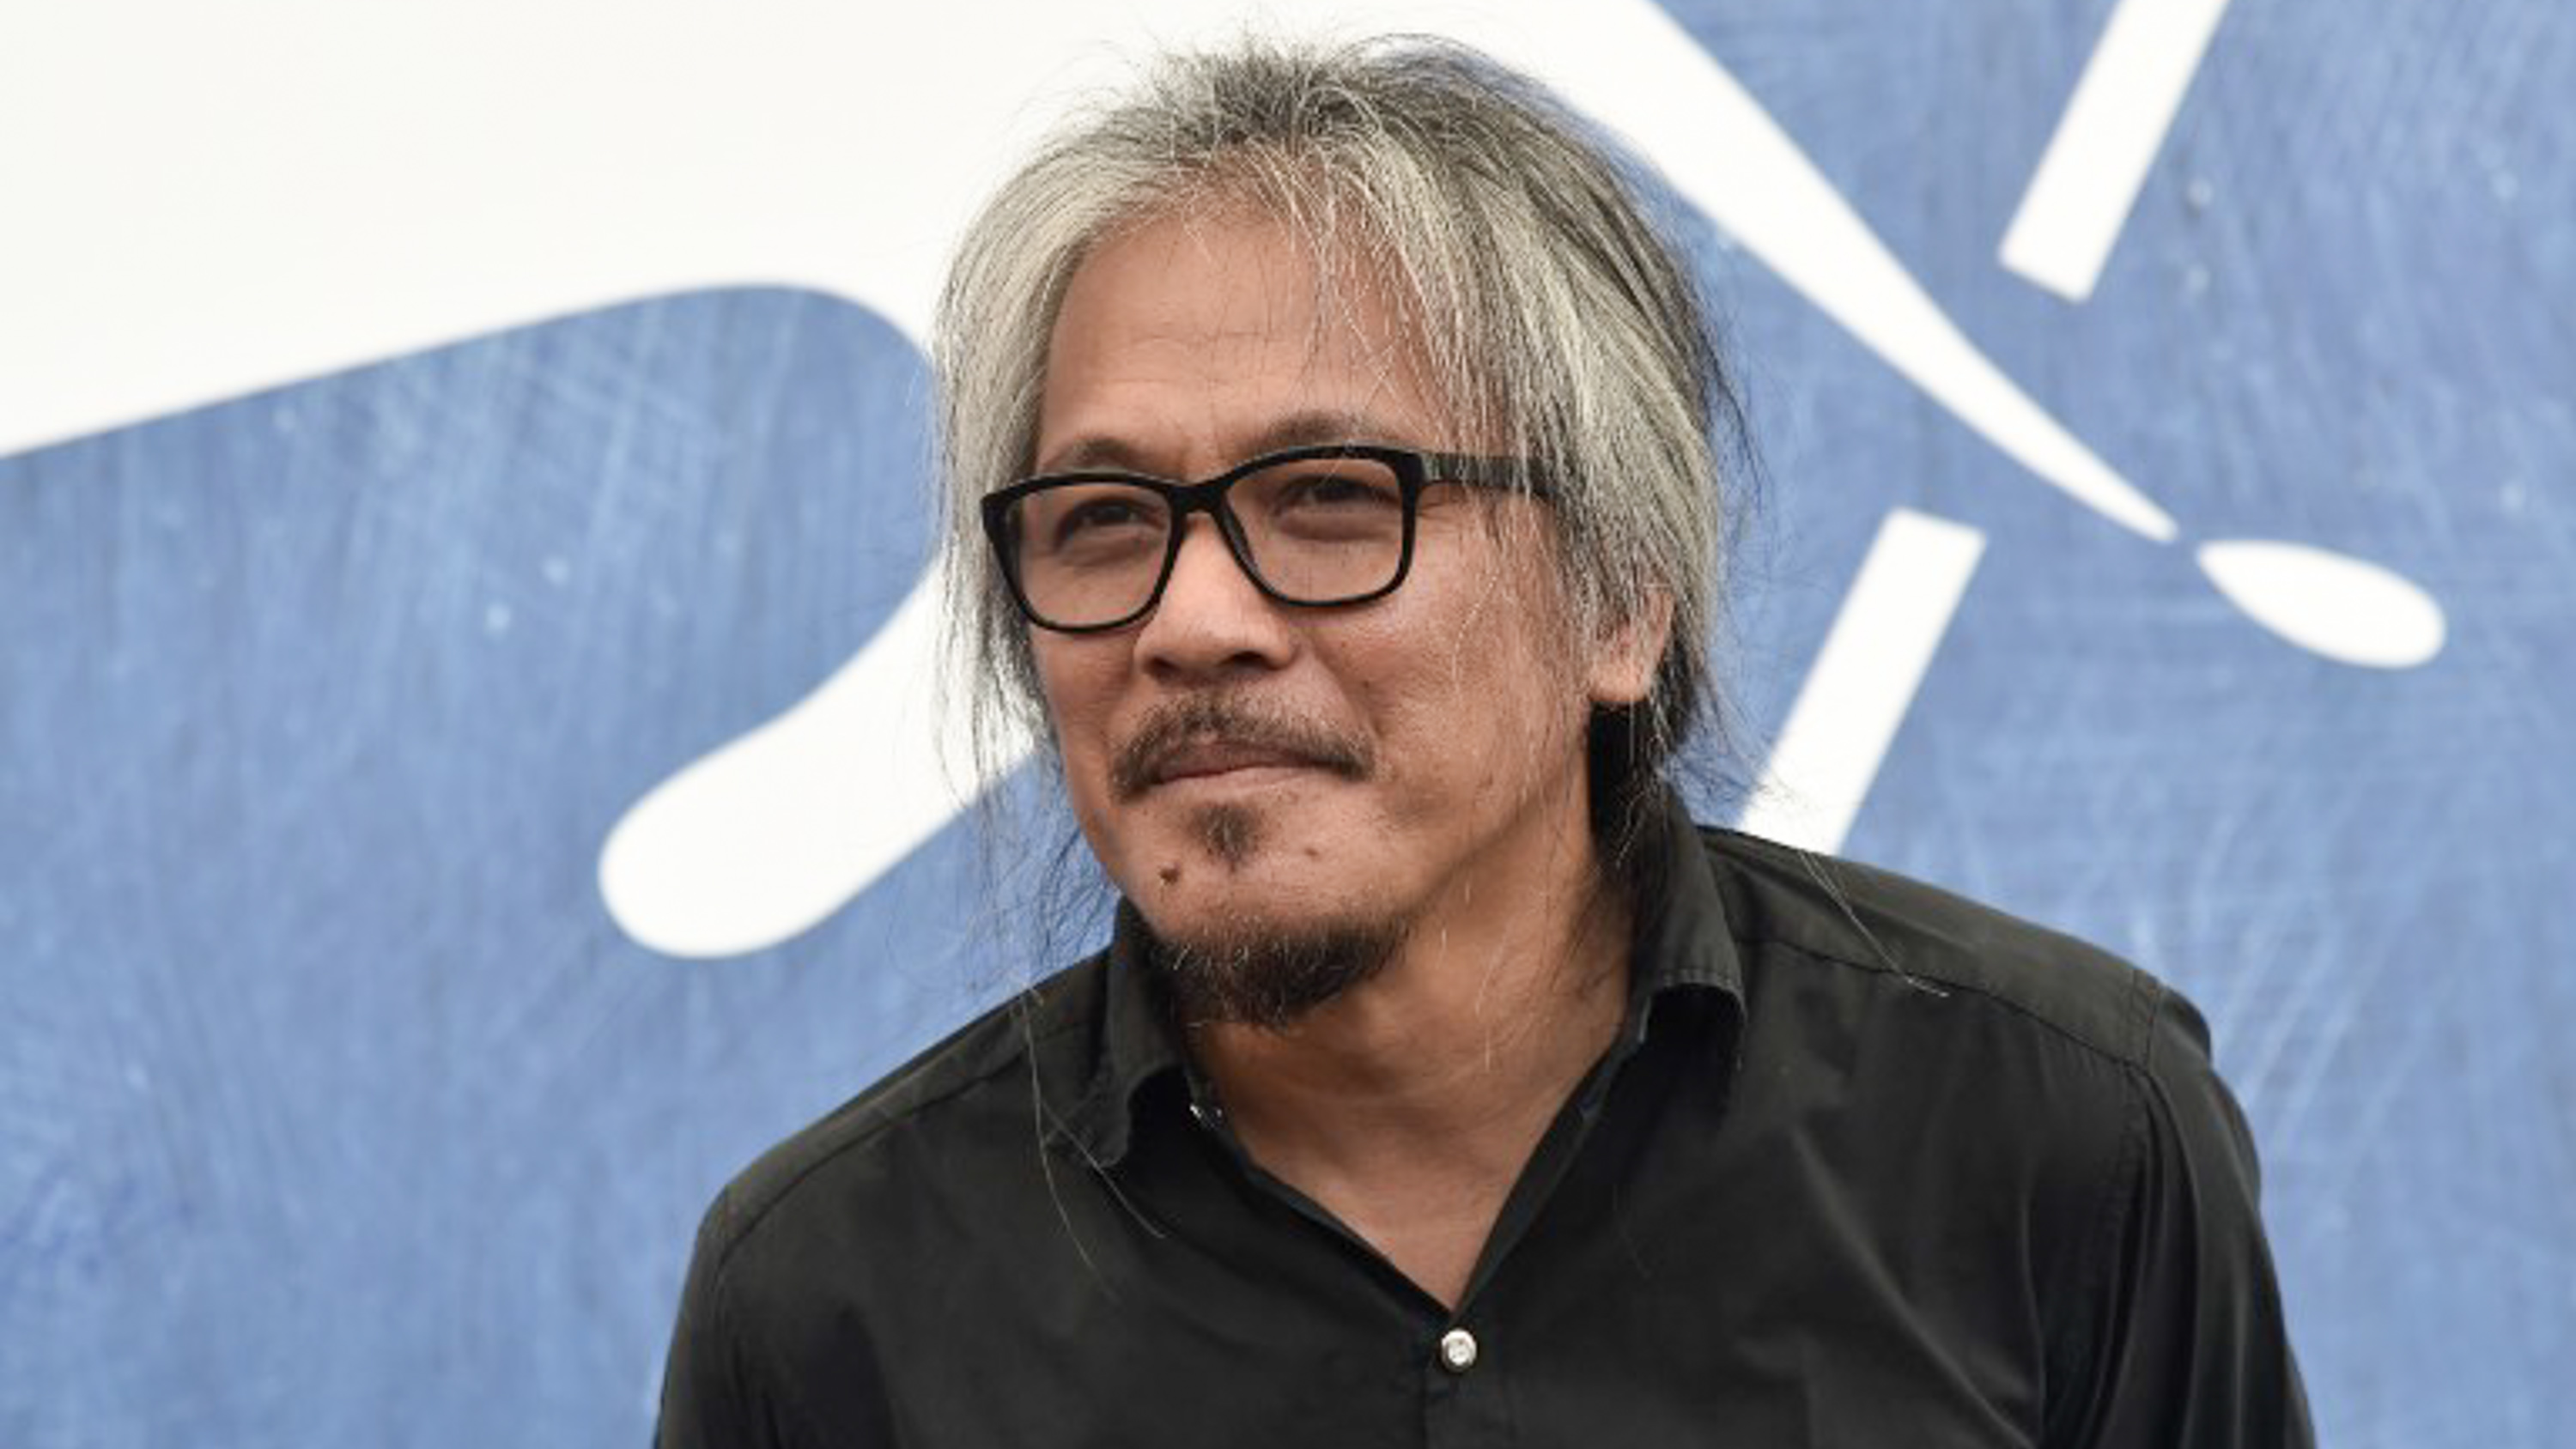 LAV DIAZ. Director Lav Diaz attends the photocall of the movie 'Ang Babaeng Humayo' (The Woman Who Left) presented in competition at the 73rd Venice Film Festival on September 9, 2016 at Venice Lido. Photo by Tiziana Fabi/AFP 